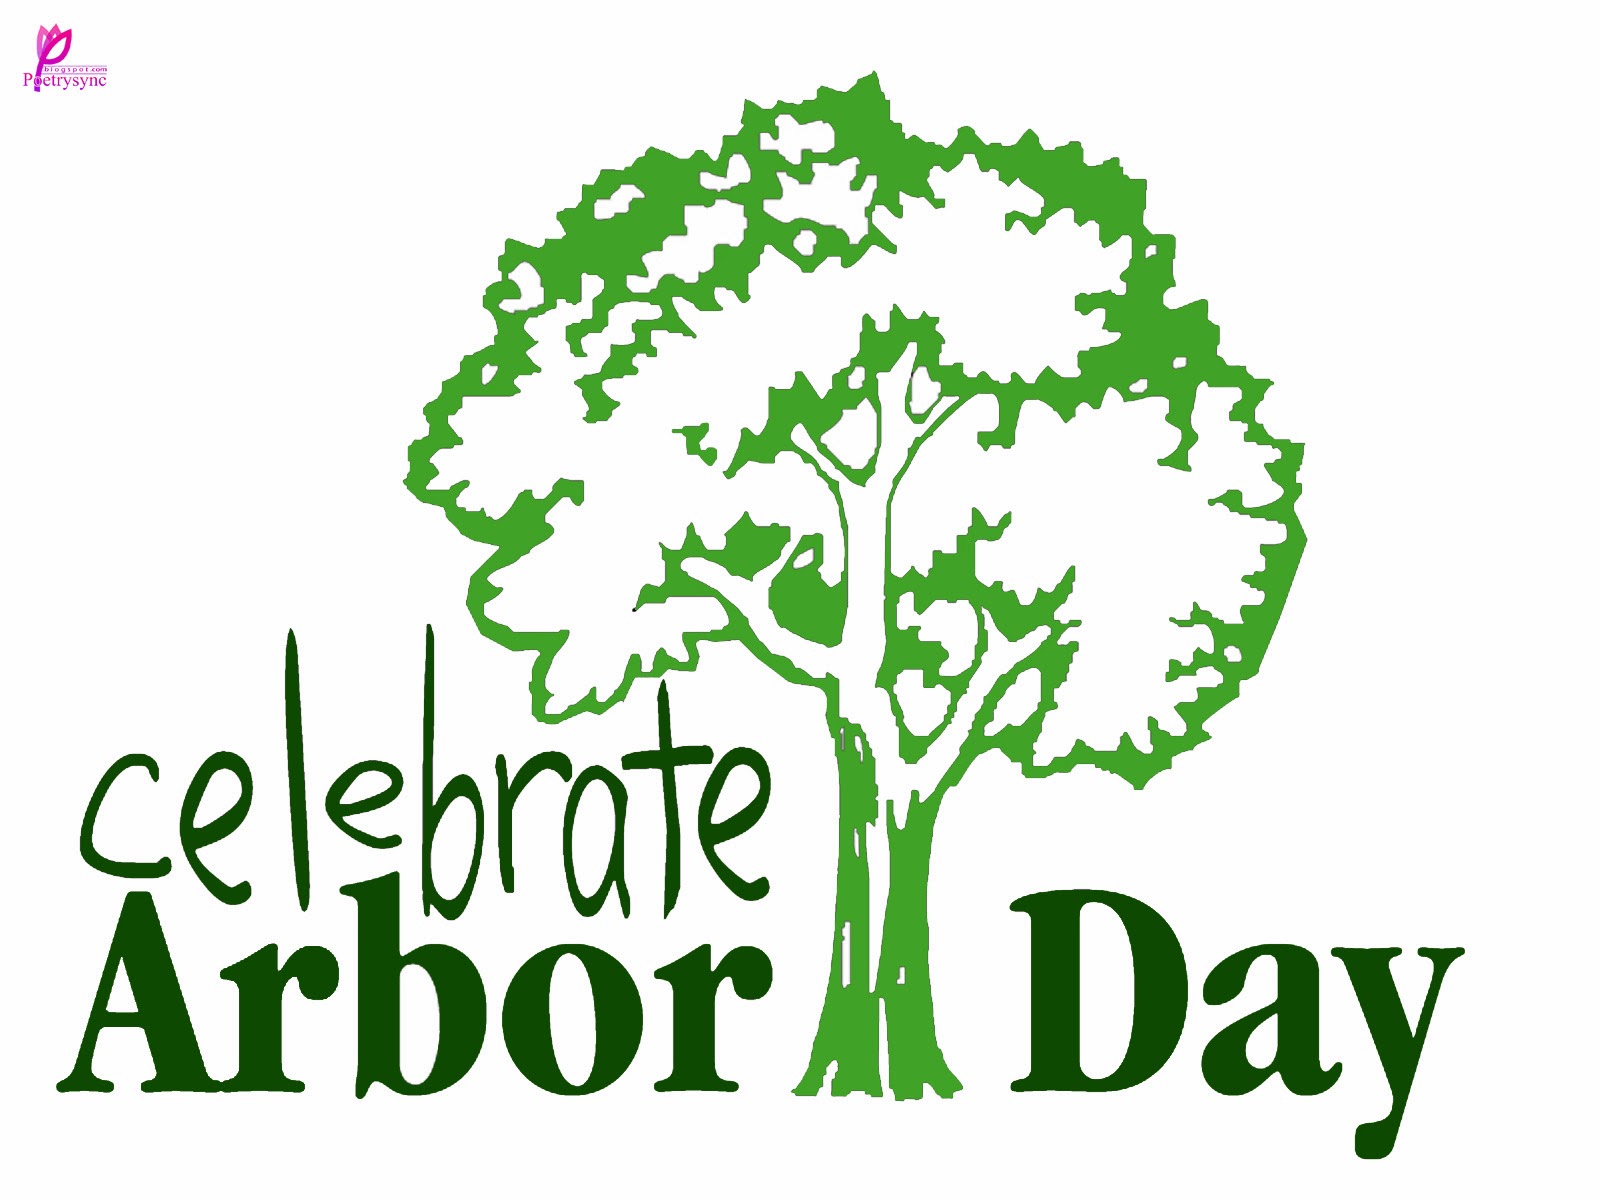 Arbor Day Quotes and Beautiful Arbor Tree Images | 26 January